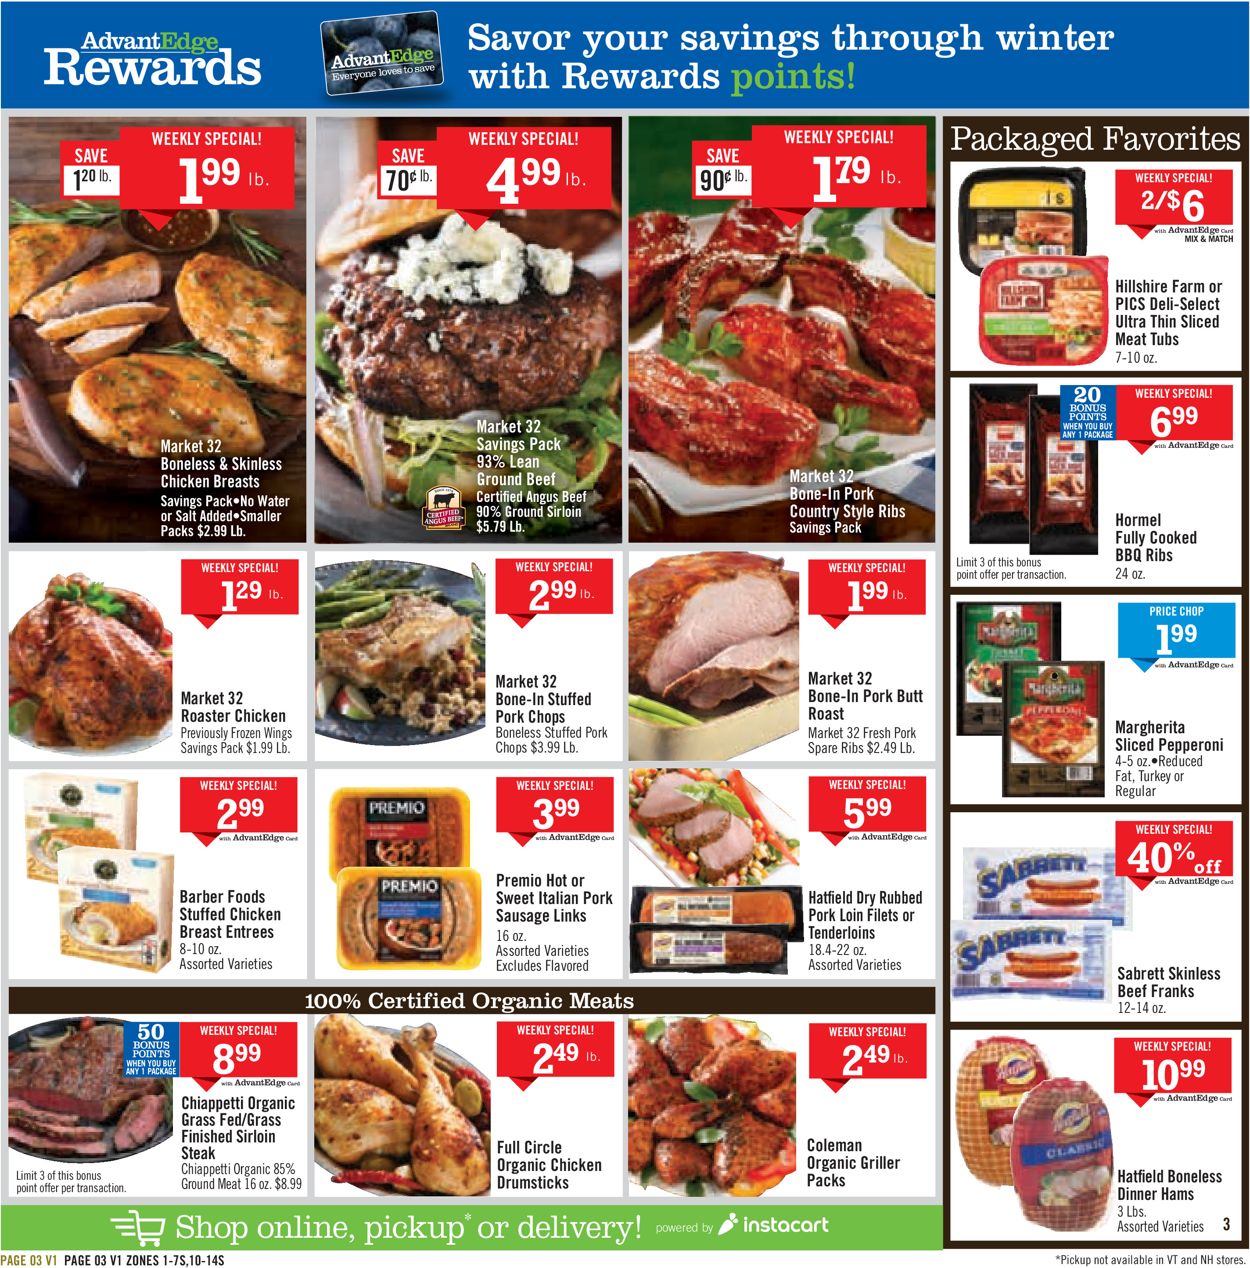 Price Chopper Current weekly ad 01/12 - 01/18/2020 [7] - frequent-ads.com